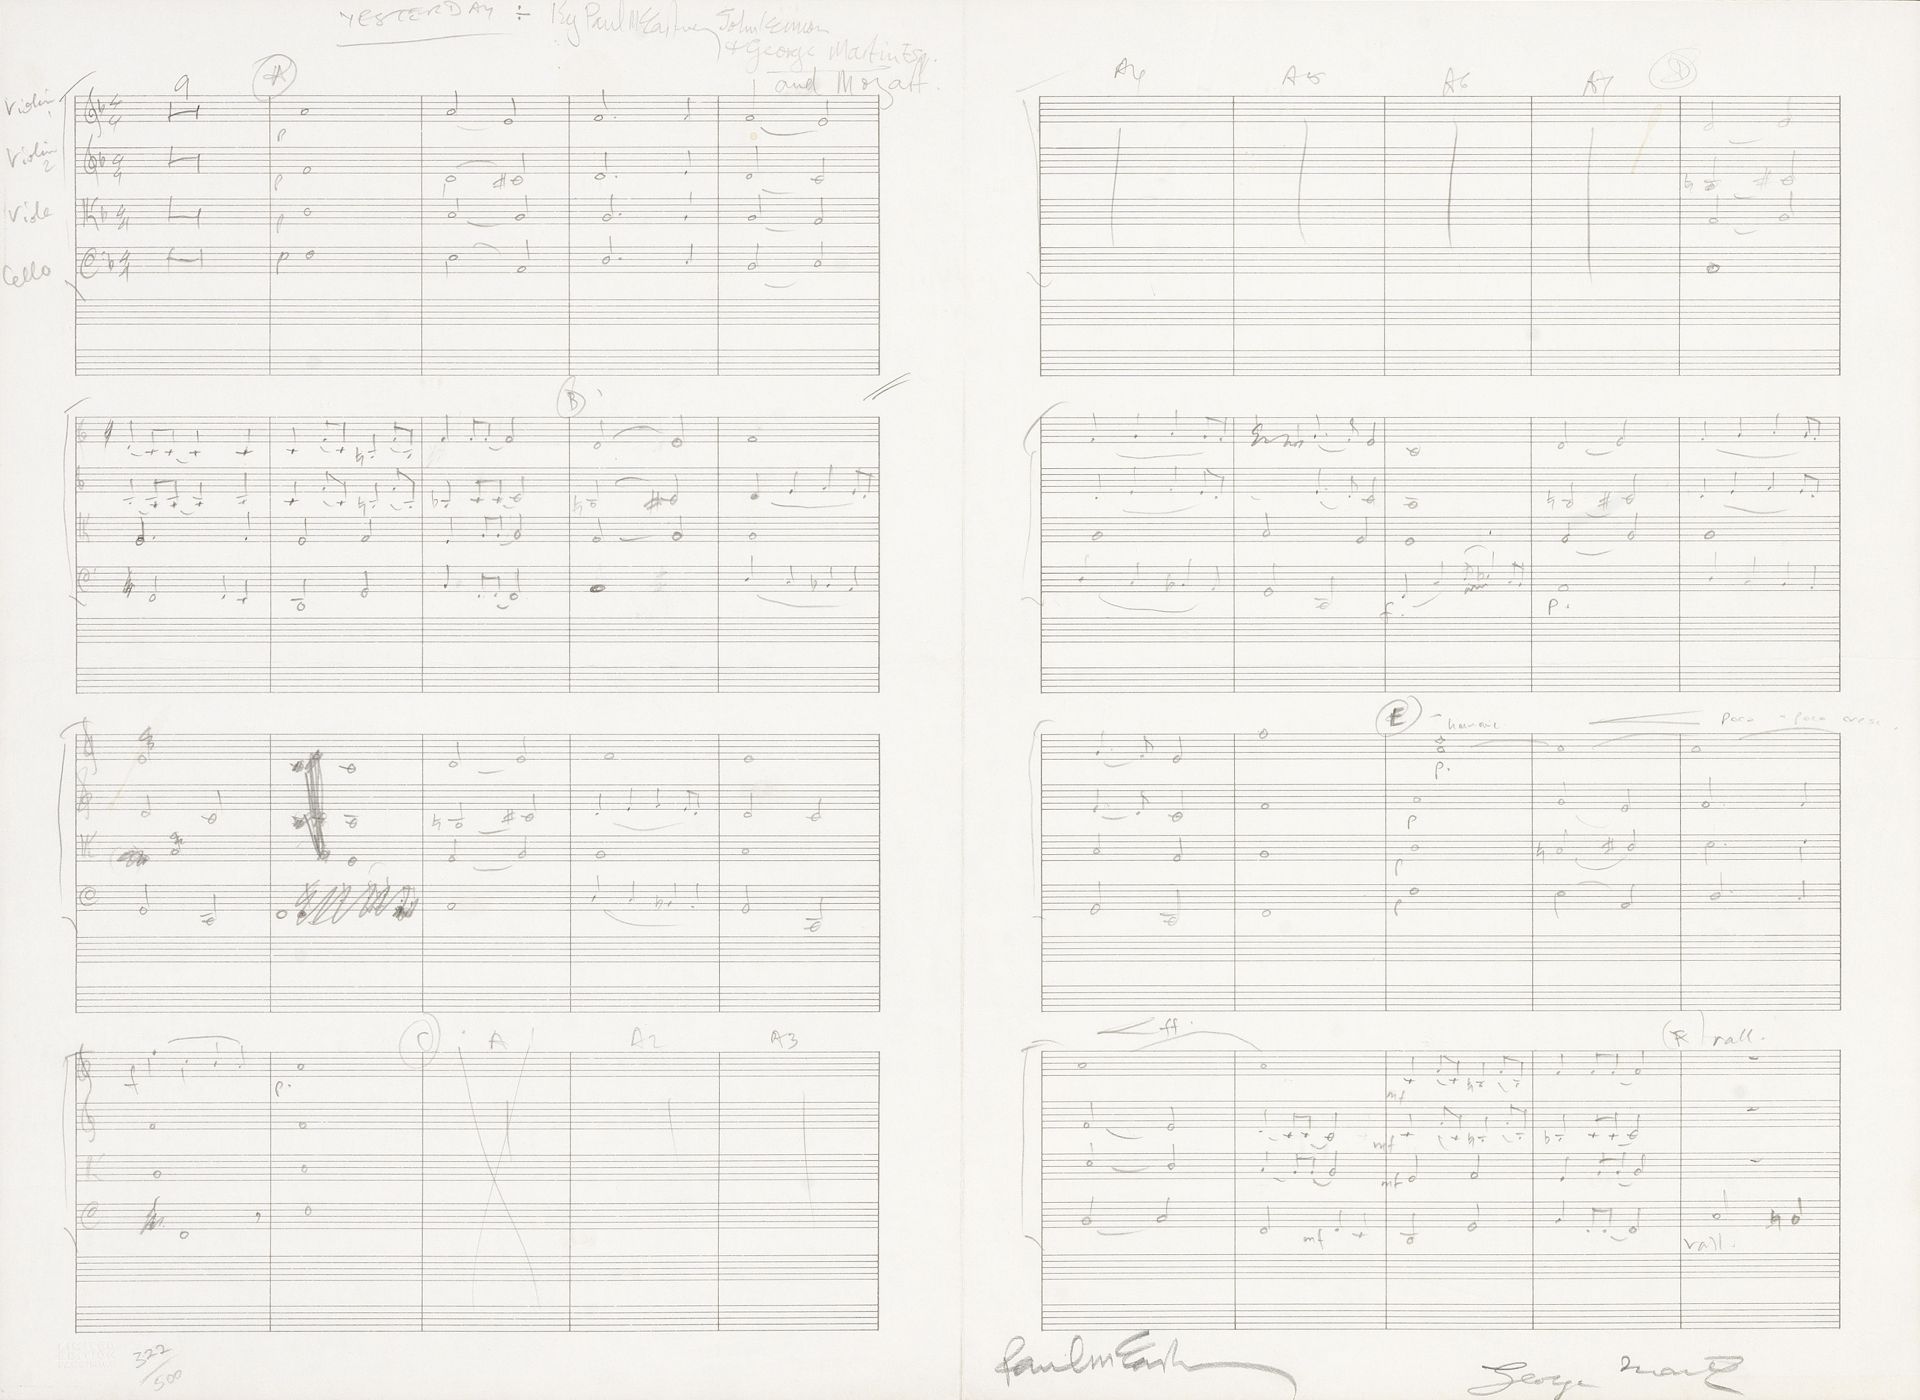 The Beatles/Paul McCartney: A Limited Edition Lithograph of the Music Score for Yesterday, 1965,